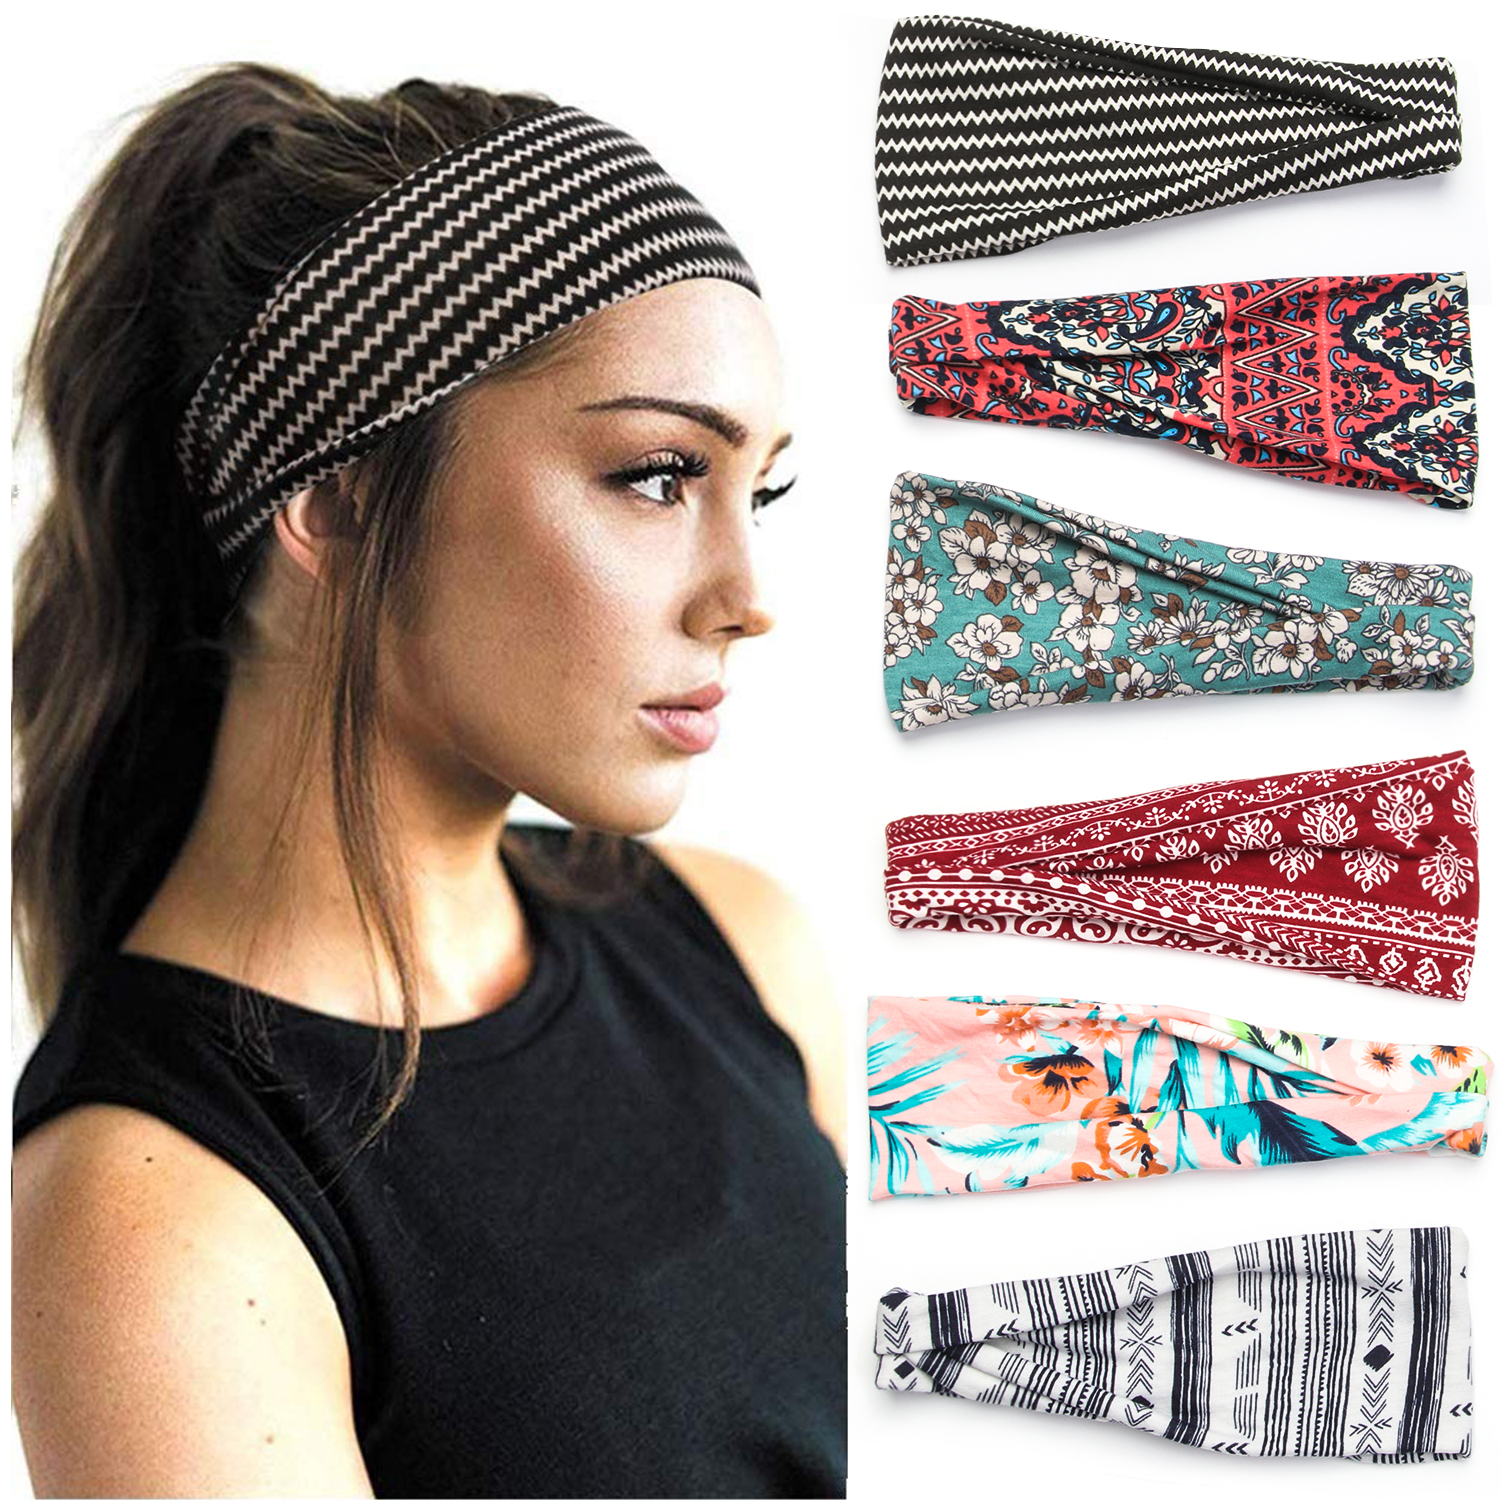 GVGSX9N Fashion Exercise Yoga Stretchy Workout Headbands for Women Sweat Headband Sweat Wicking Hair Bands Solid Headbands